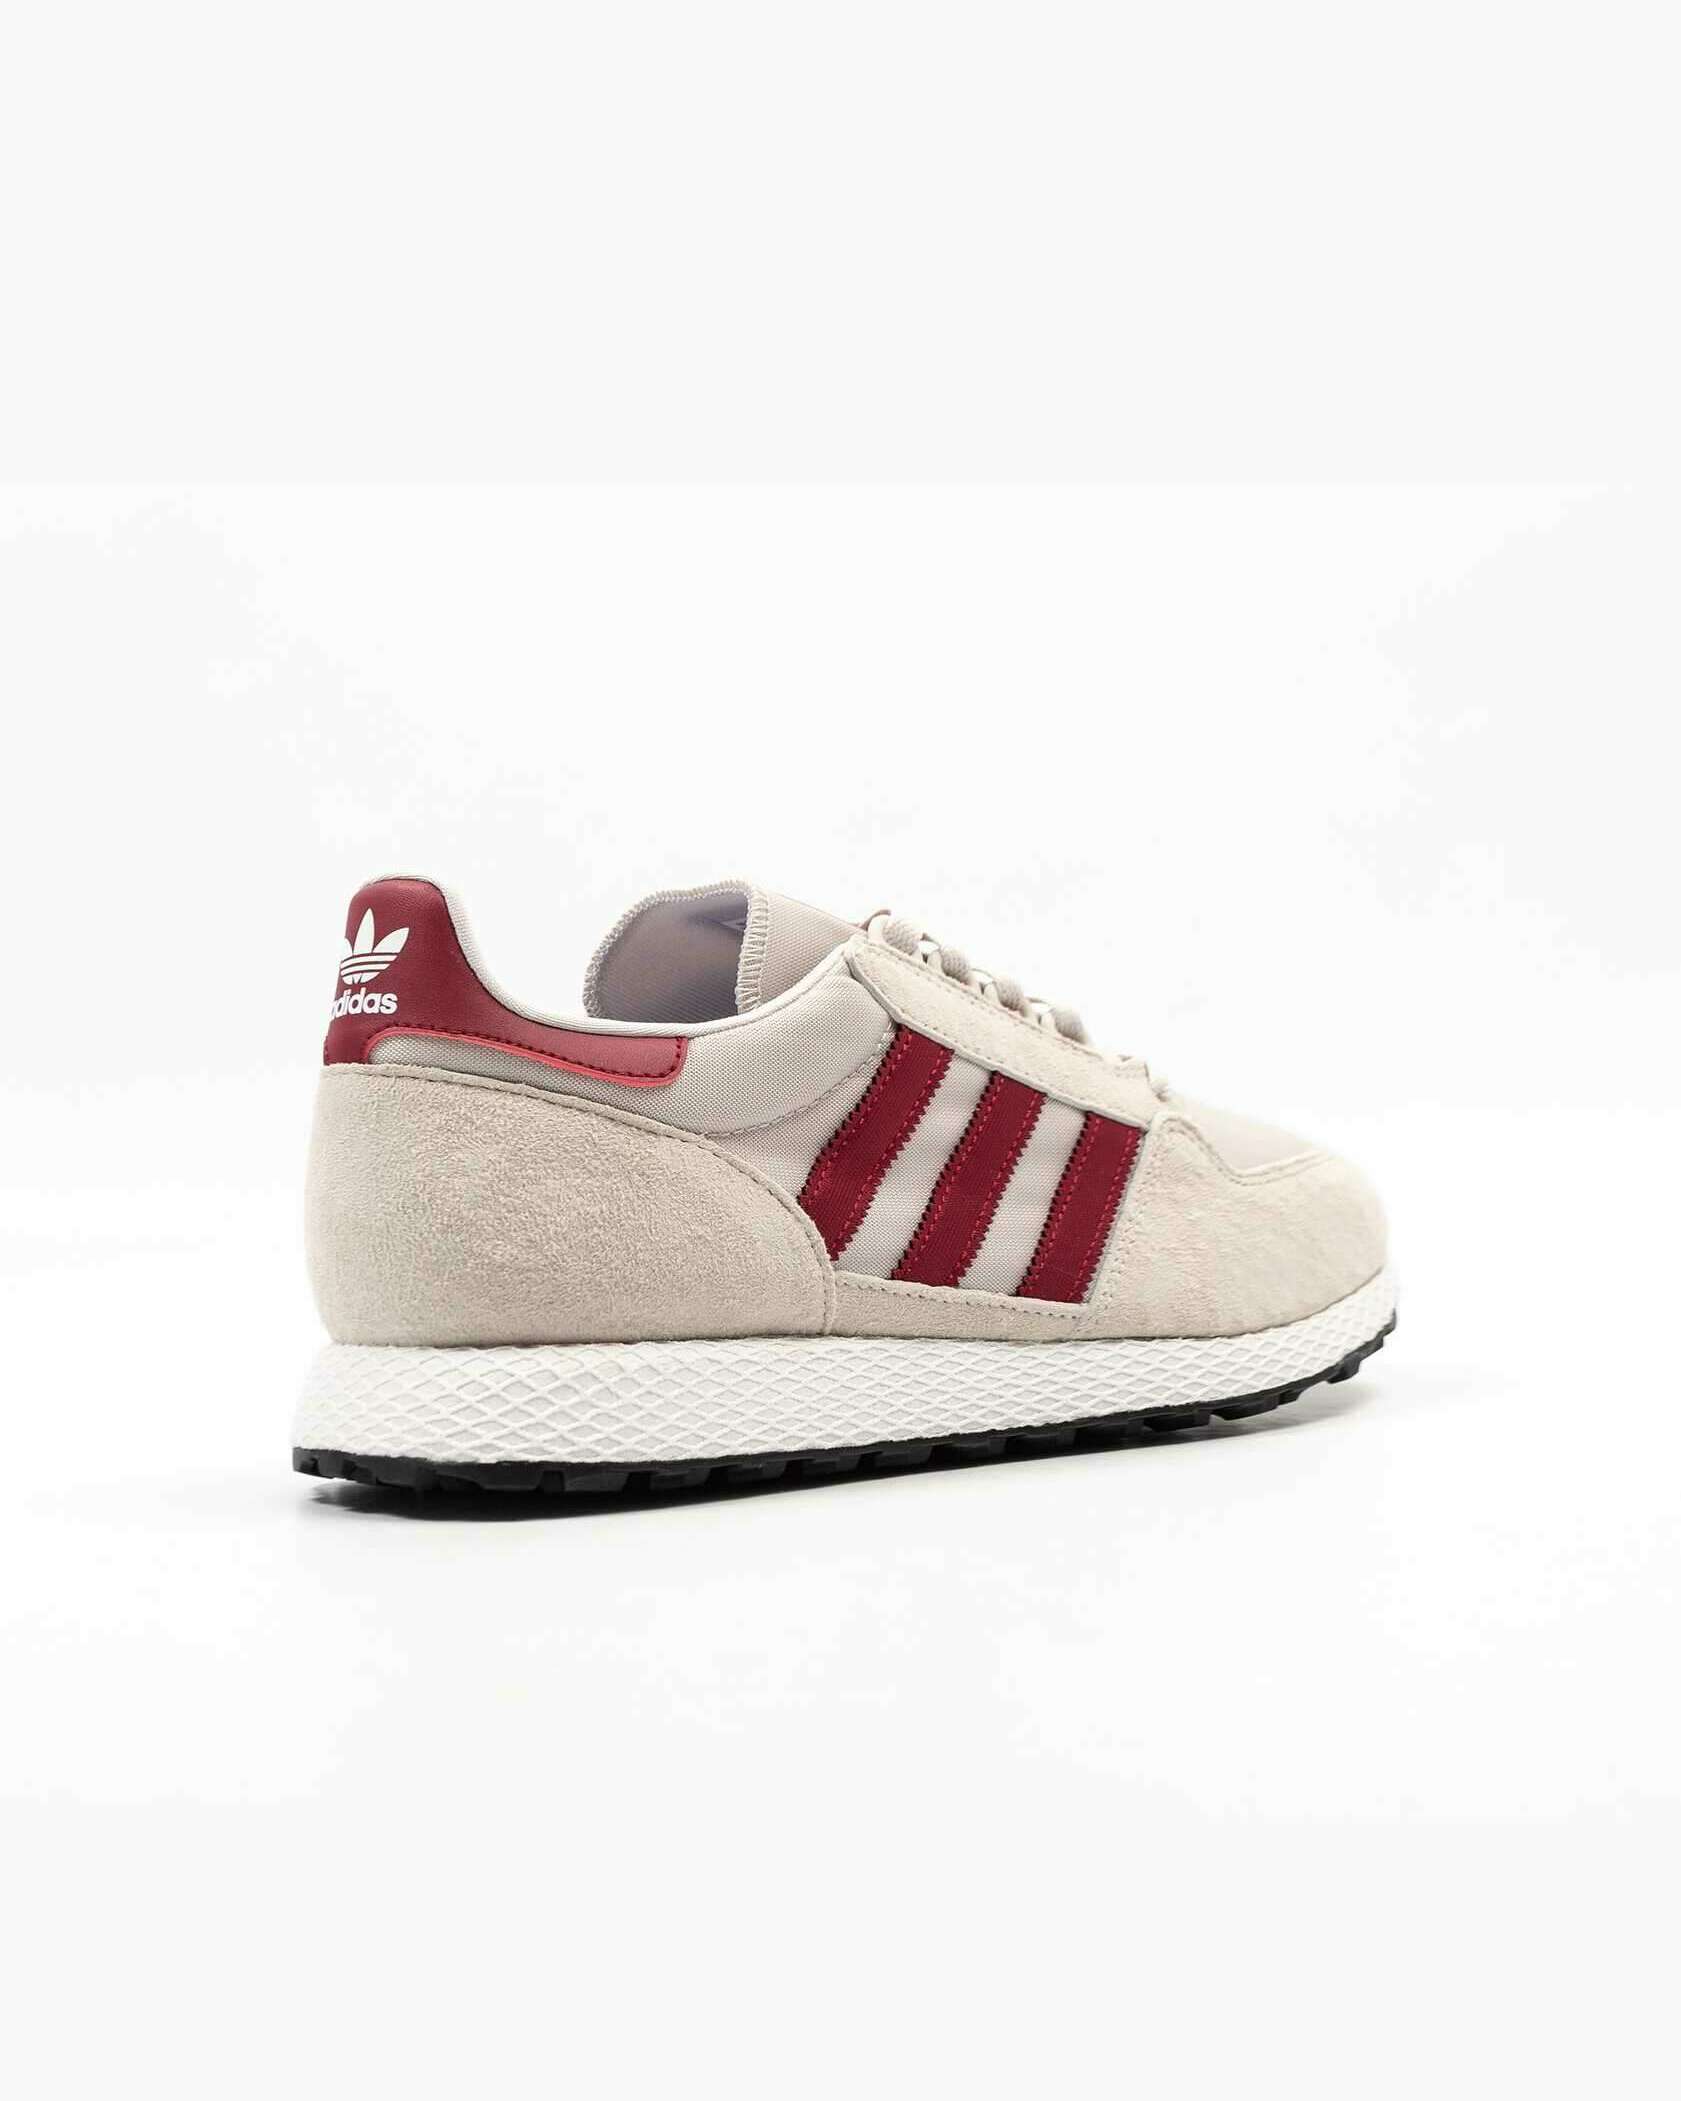 film Current shoes adidas Forest Grove B41547| Buy Online at FOOTDISTRICT